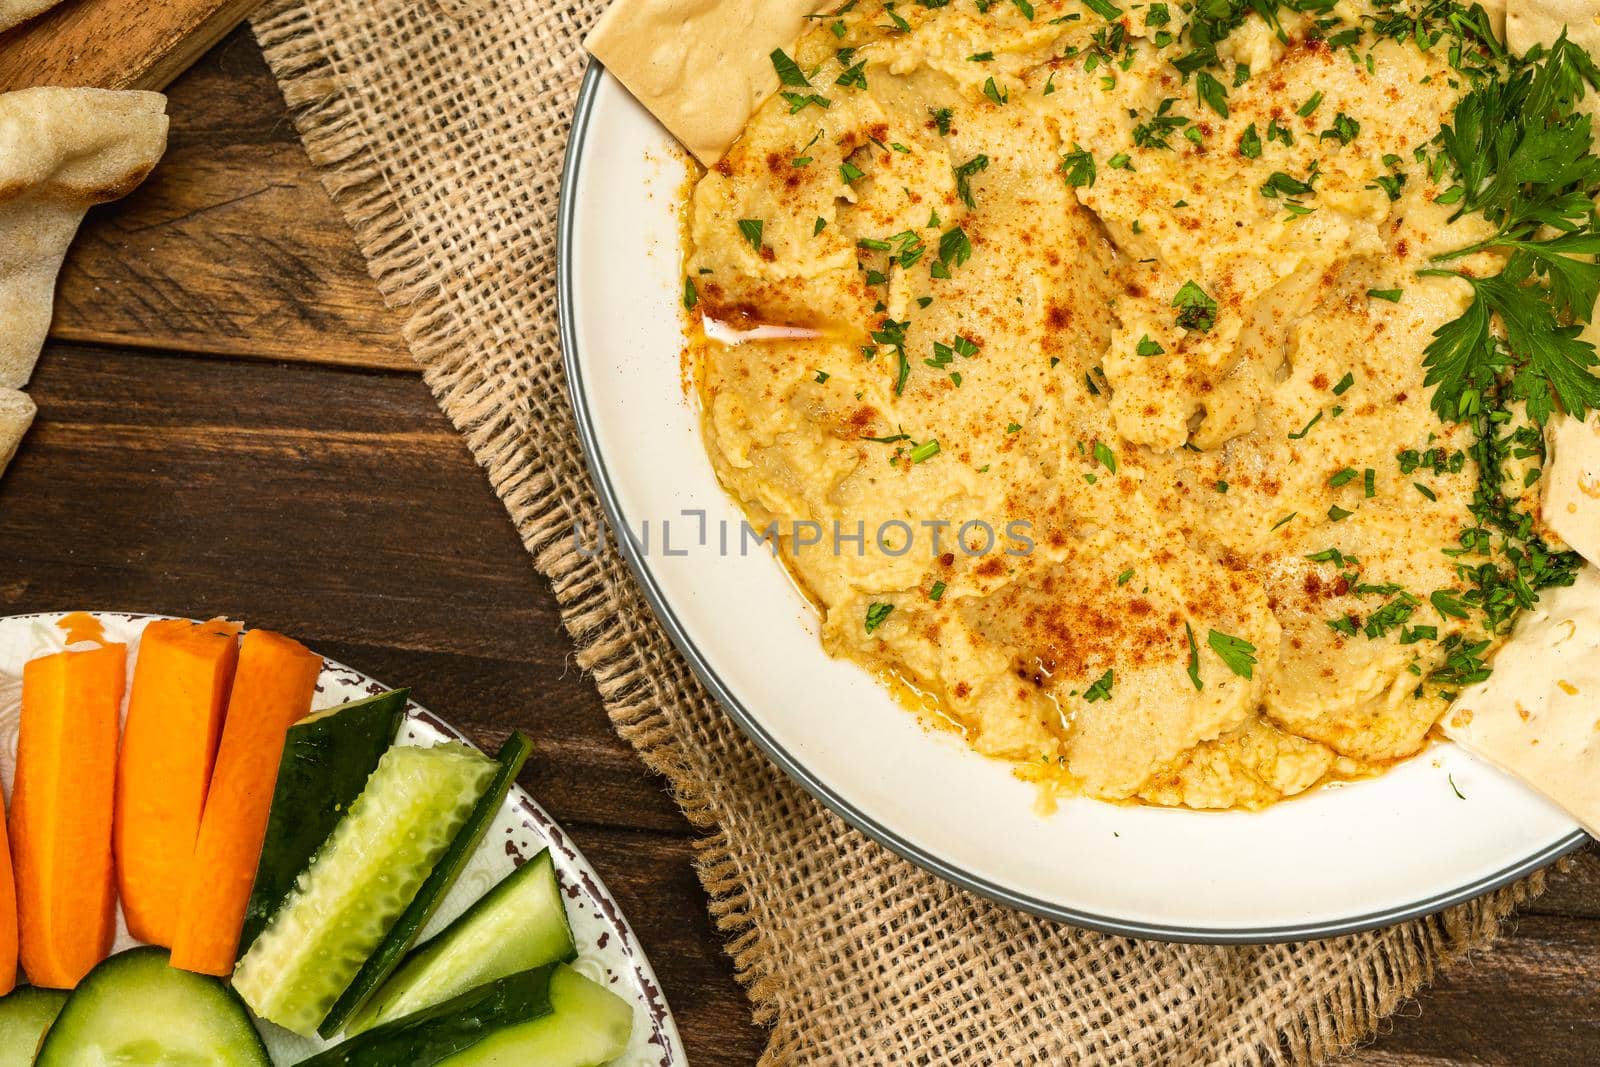 View of a bowl with homemade Hummus with crackers and in another bowl carrots and other vegetables. Fresh, healthy and natural food concept. Copy space.